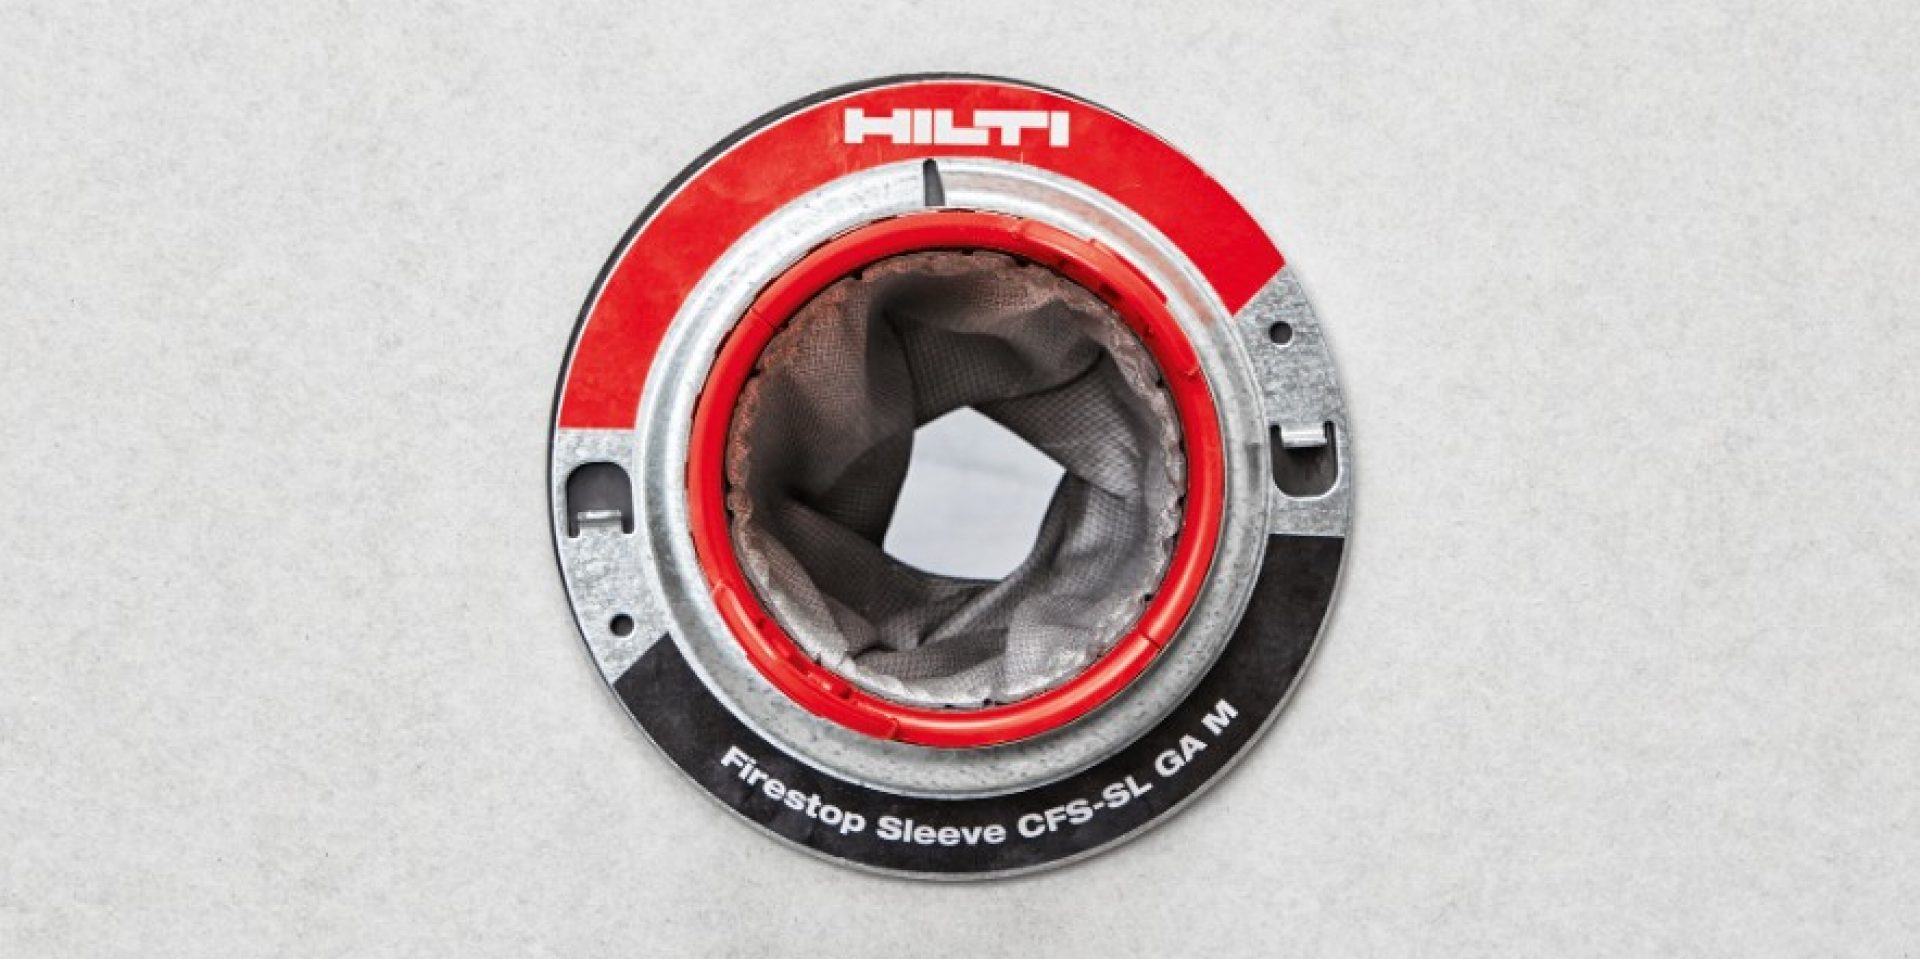 Hilti speed sleeve for cable updates